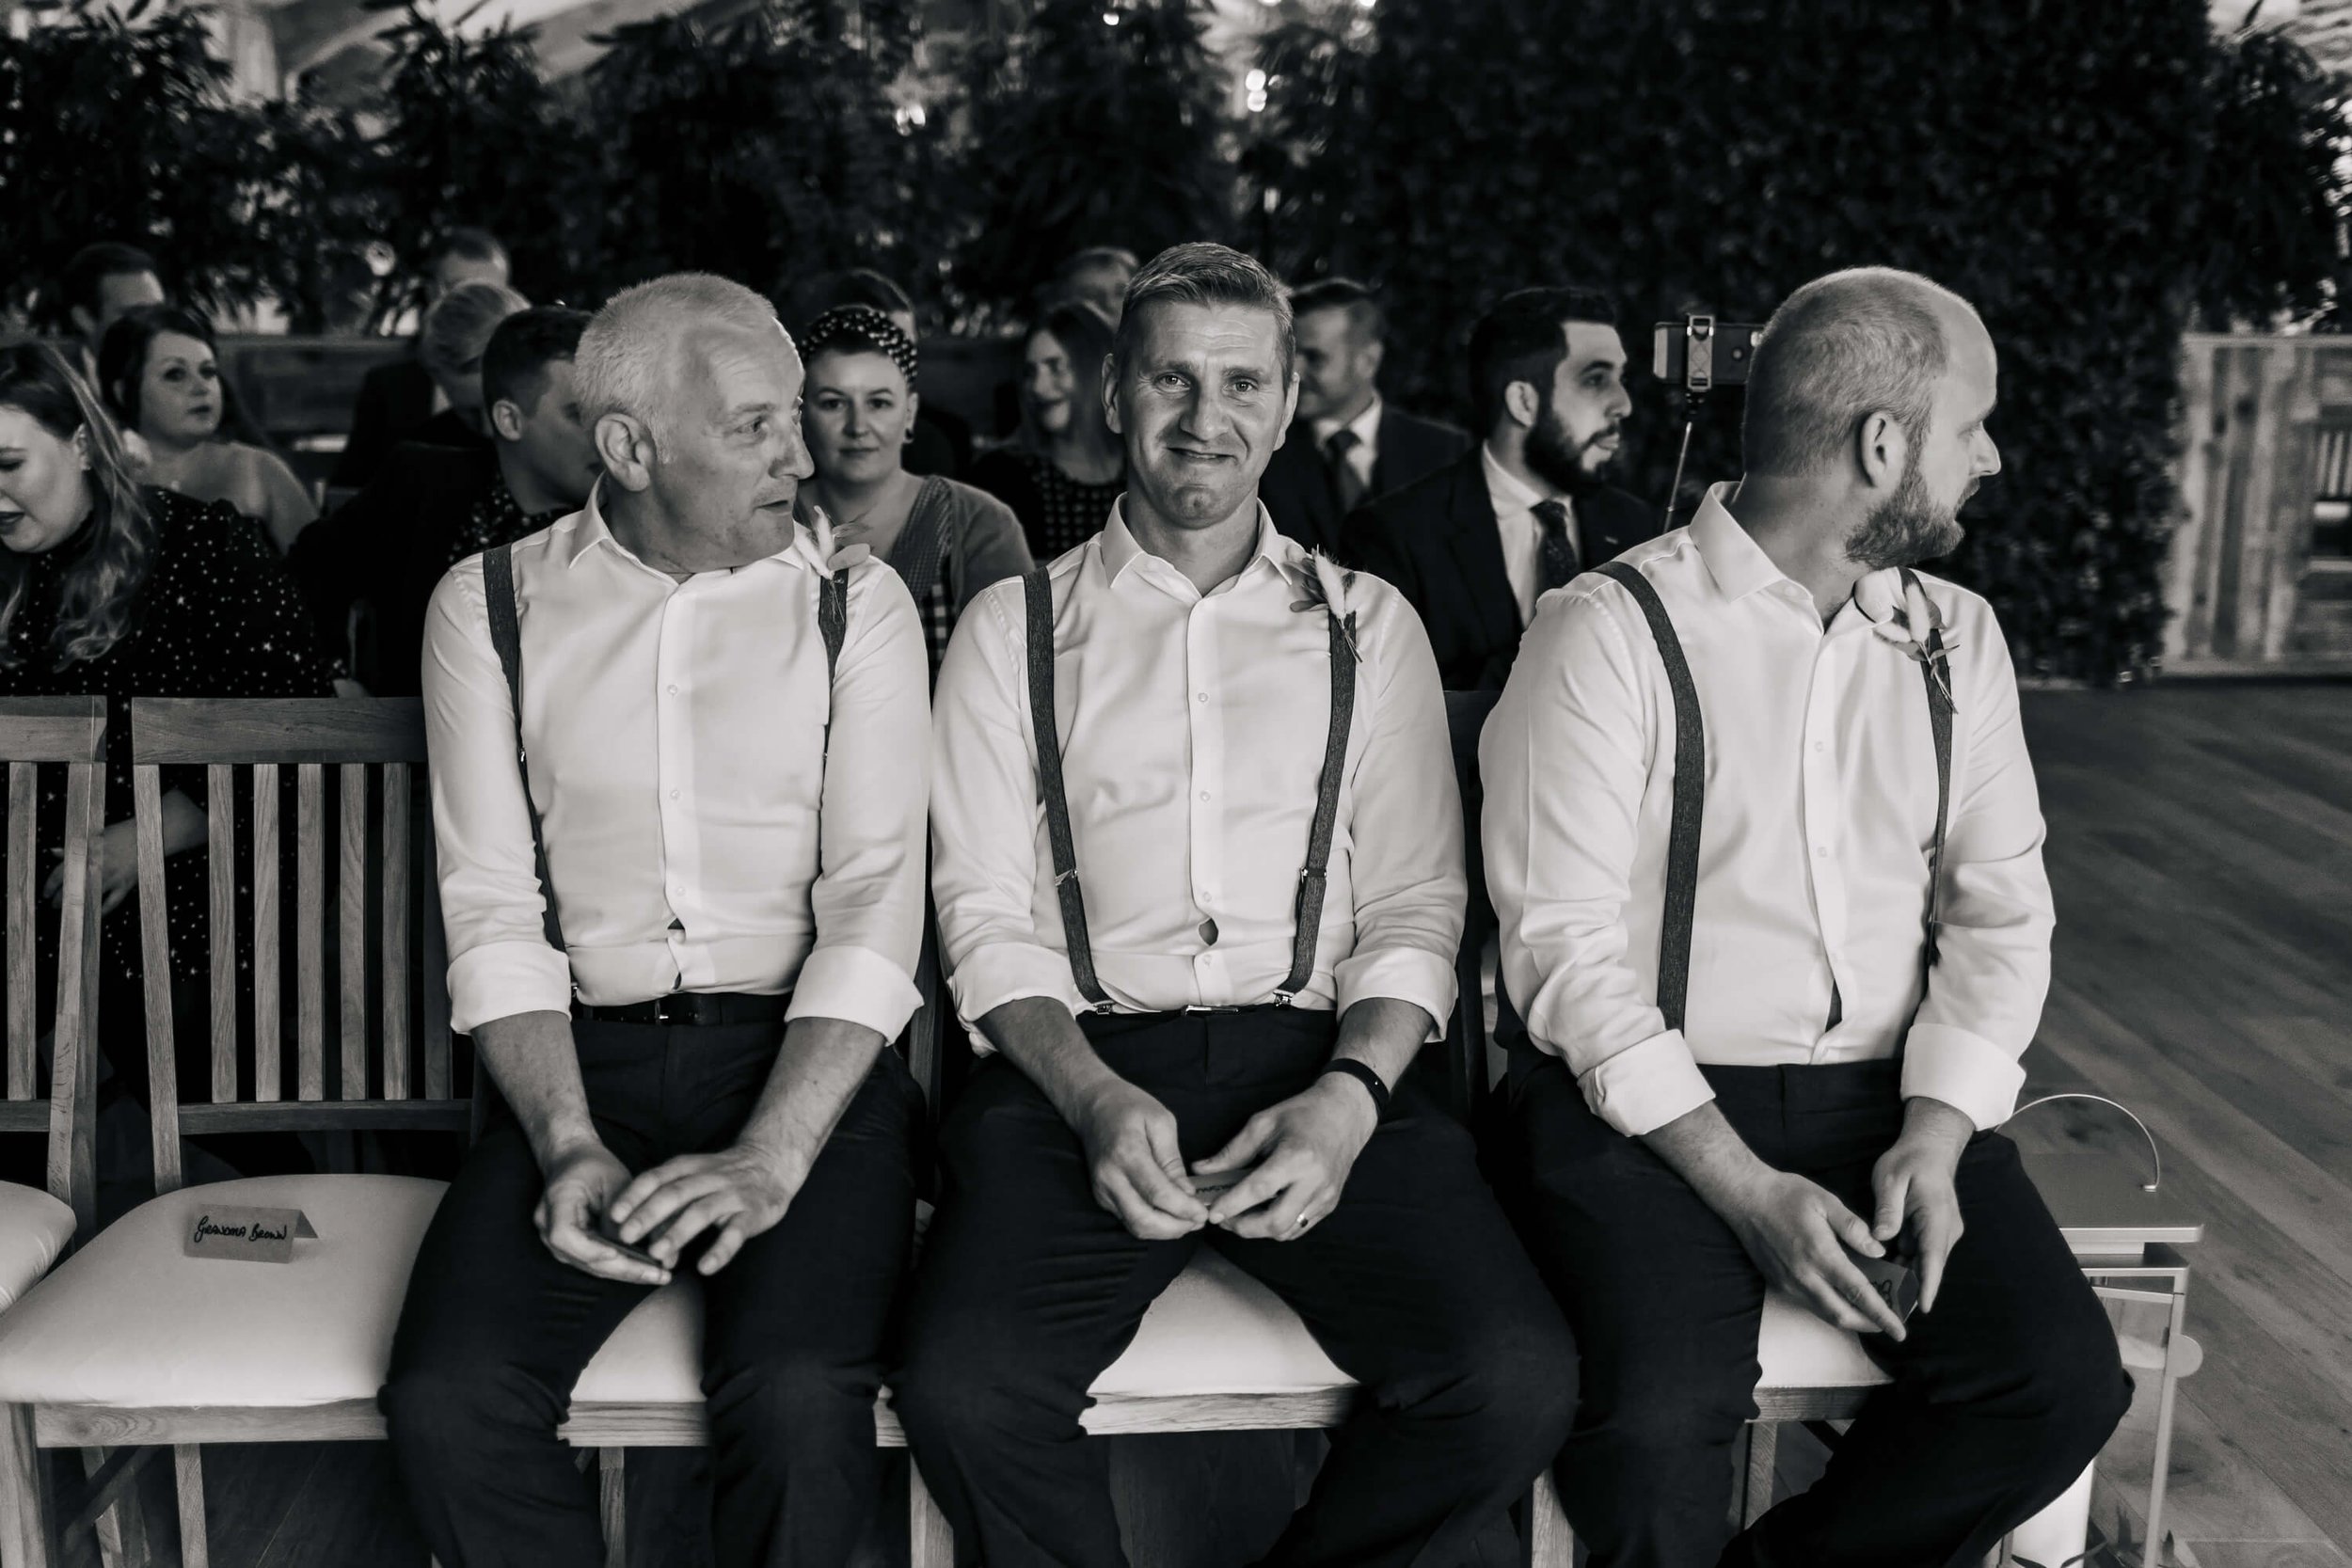 Groomsmen sitting on the front row for the ceremony